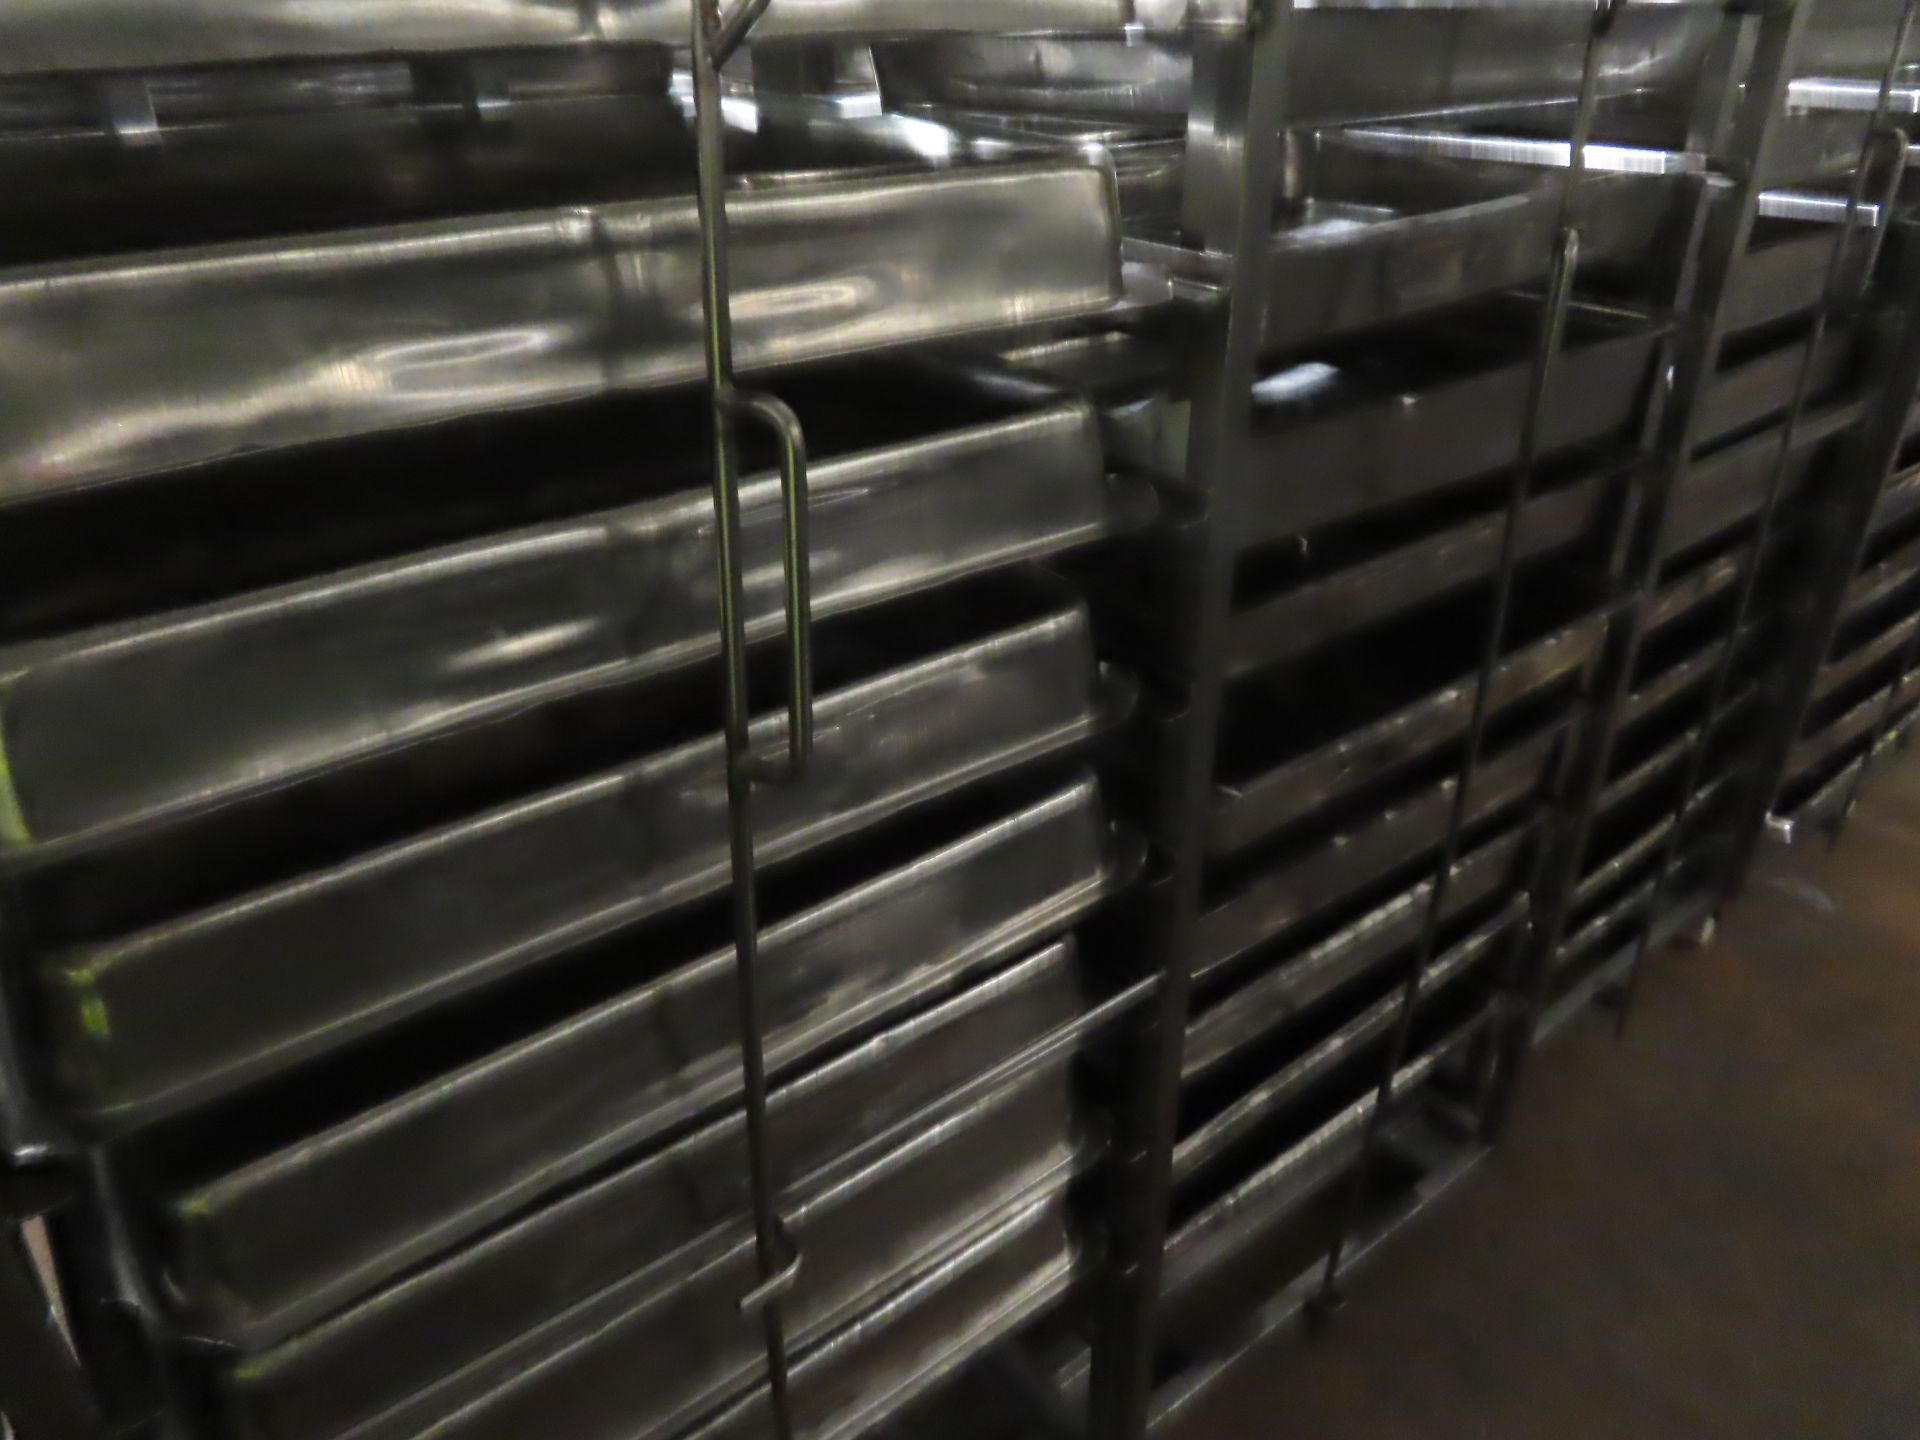 3 X S/s DOUBLE TROLLEYS WITH 60 TRAYS. - Image 3 of 3